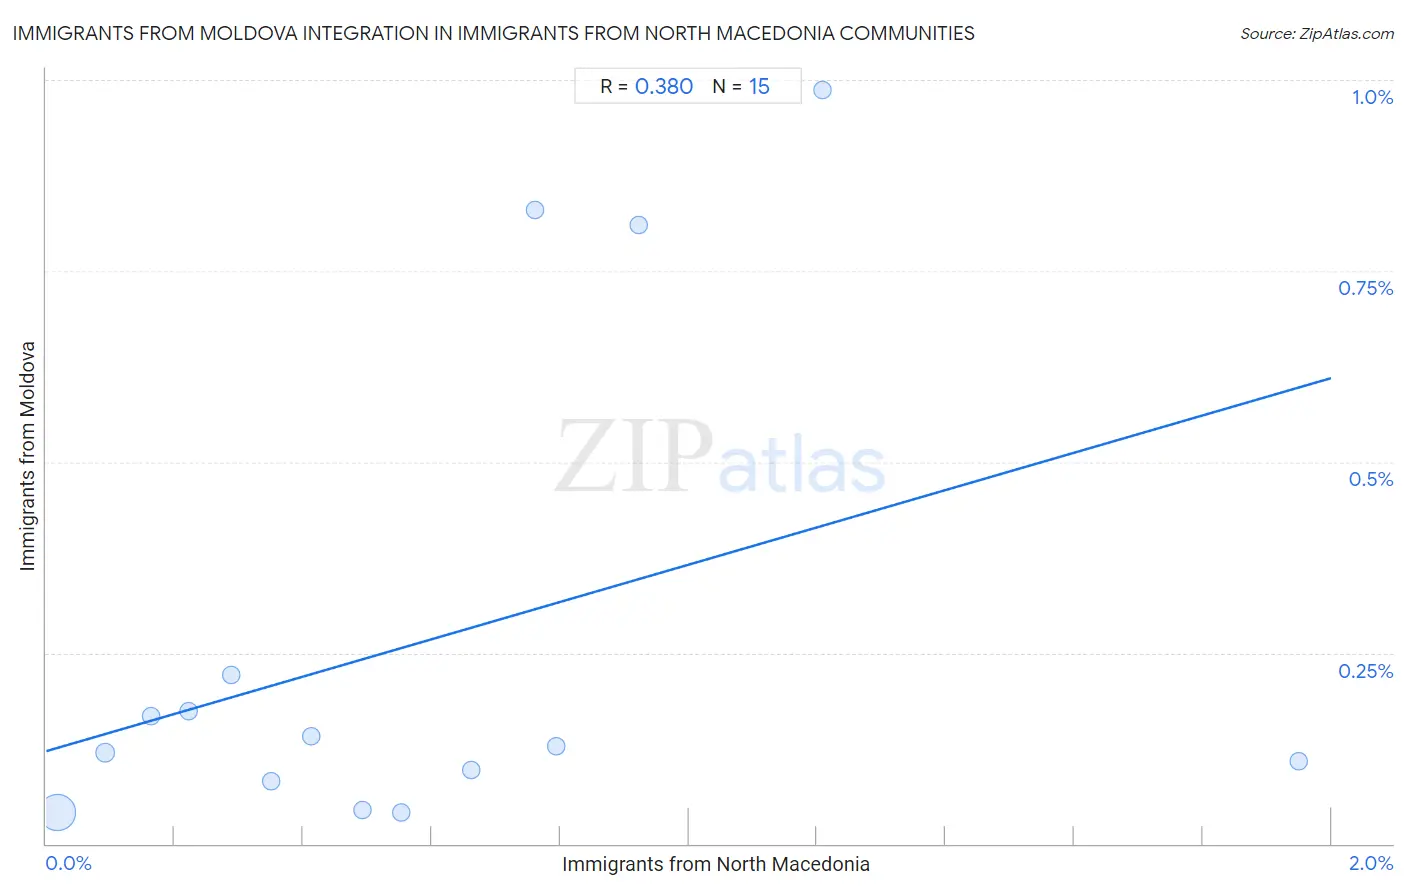 Immigrants from North Macedonia Integration in Immigrants from Moldova Communities